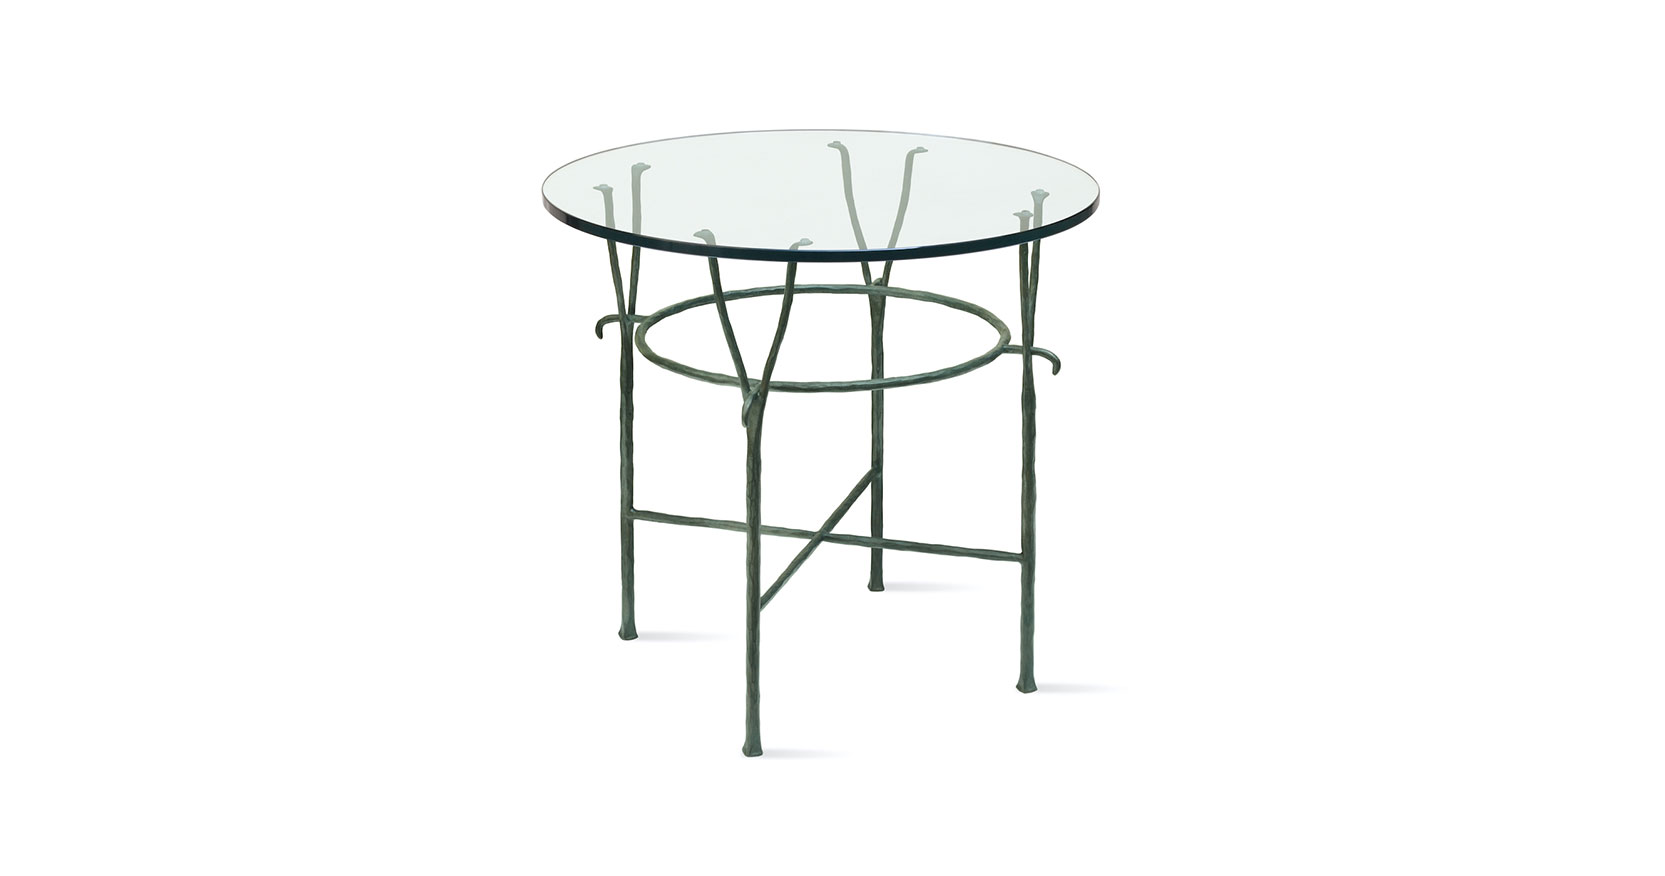 Garouste Bonetti, round minimalist small table with 4 green bronze legs ending in two forks and a glass top